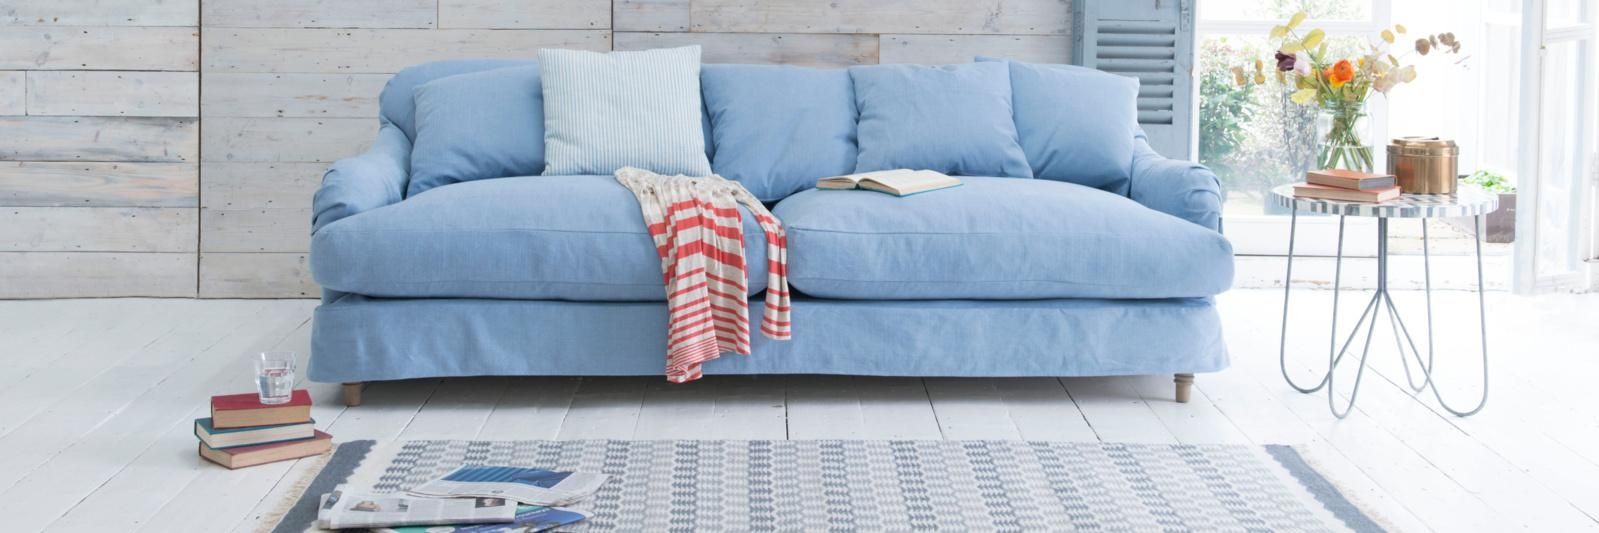 Loose Cover Sofas | Sofas With Removable Covers | Loaf Regarding Sofas With Removable Covers (View 1 of 20)